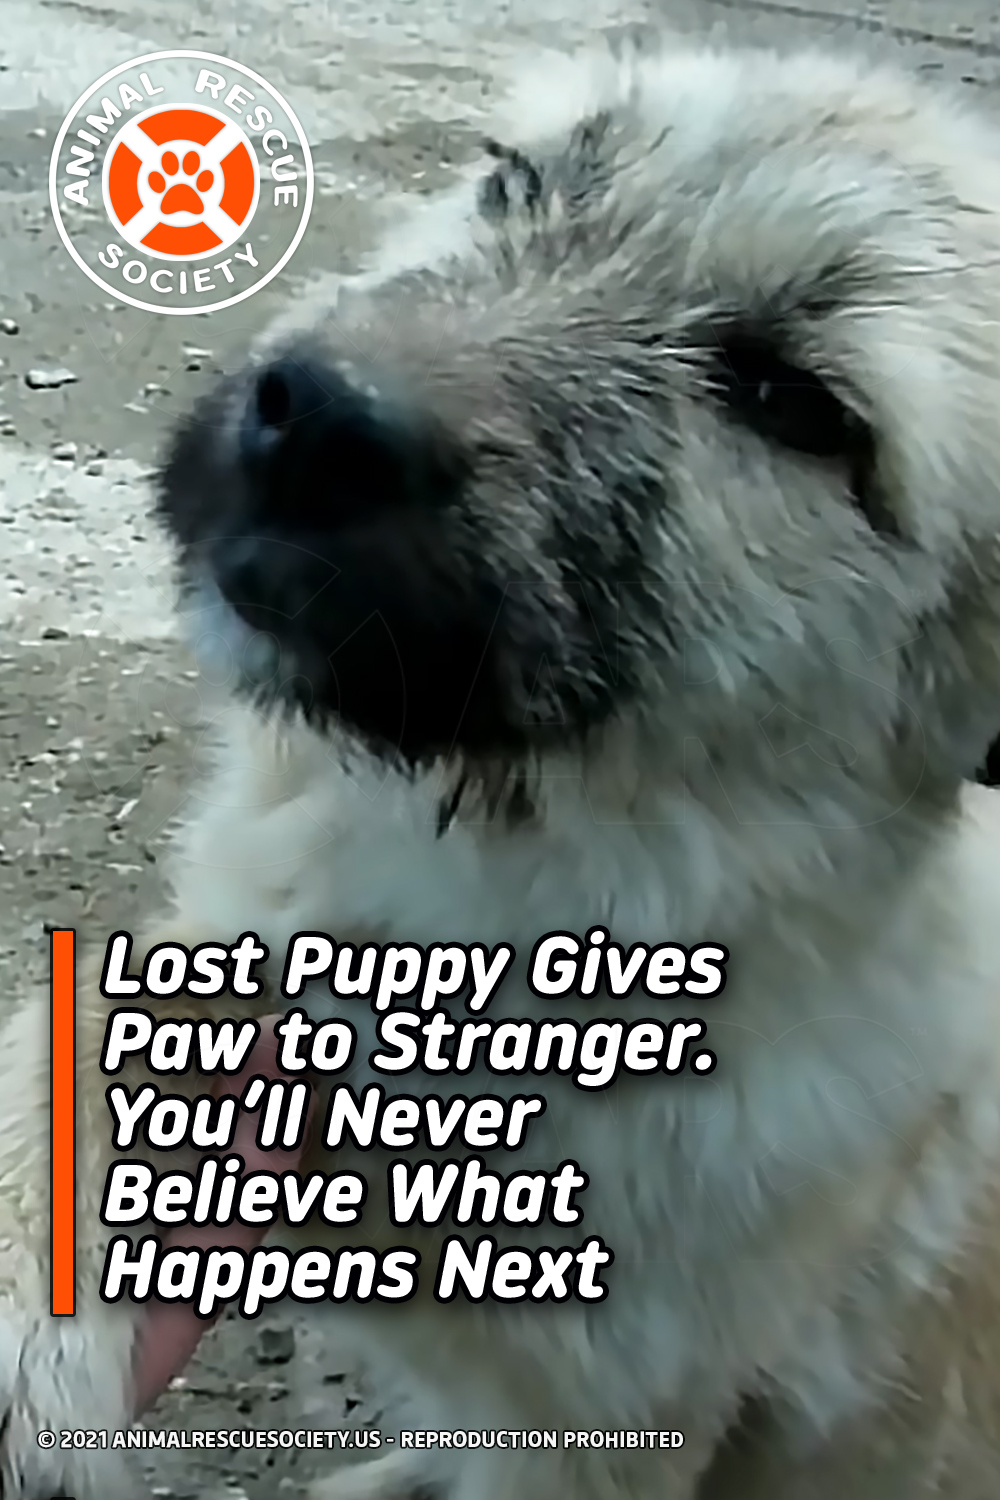 Lost Puppy Gives Paw to Stranger. You’ll Never Believe What Happens Next